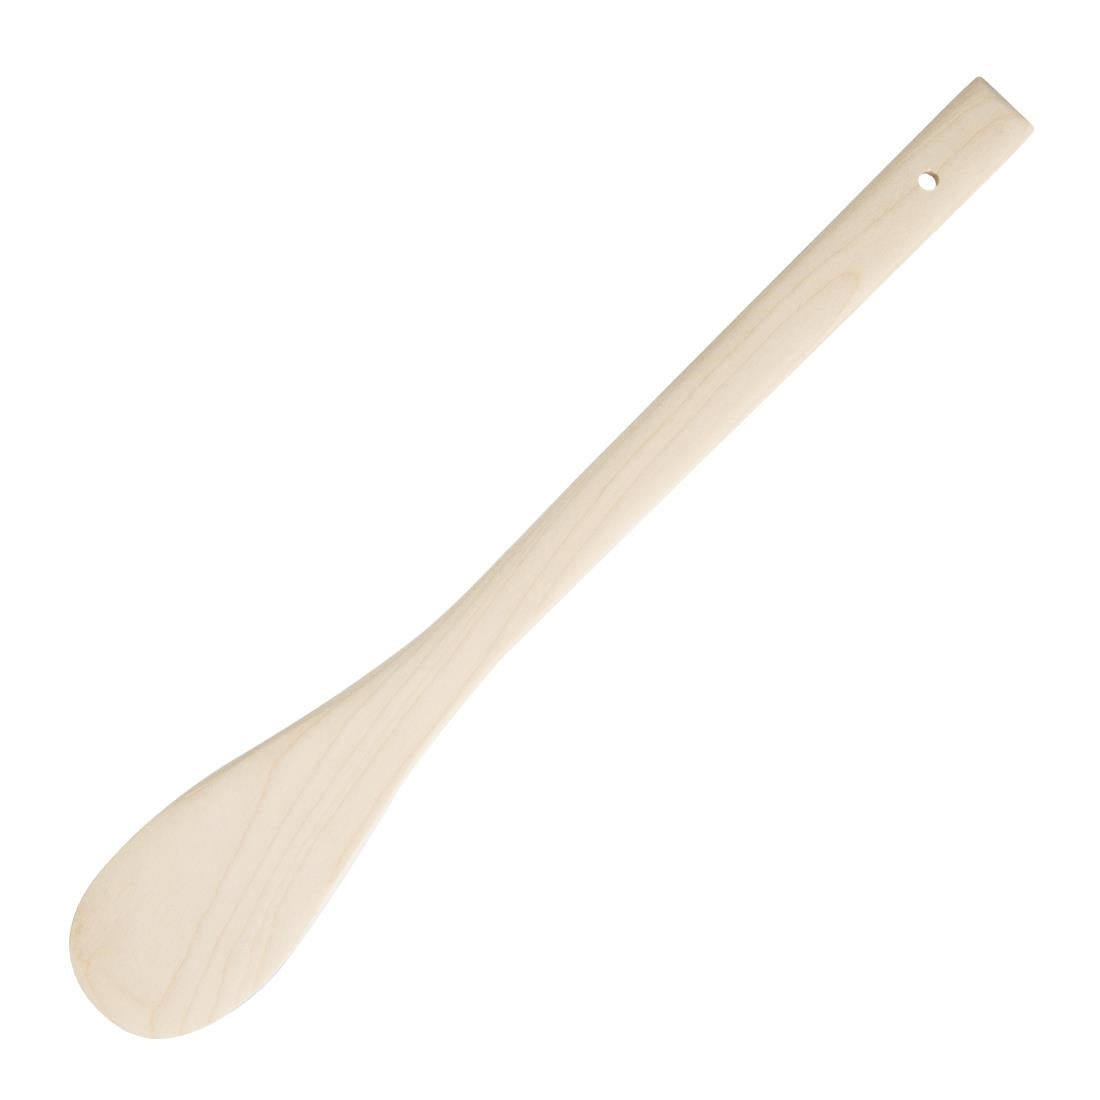 J113 Vogue Round Ended Wooden Spatula 12"